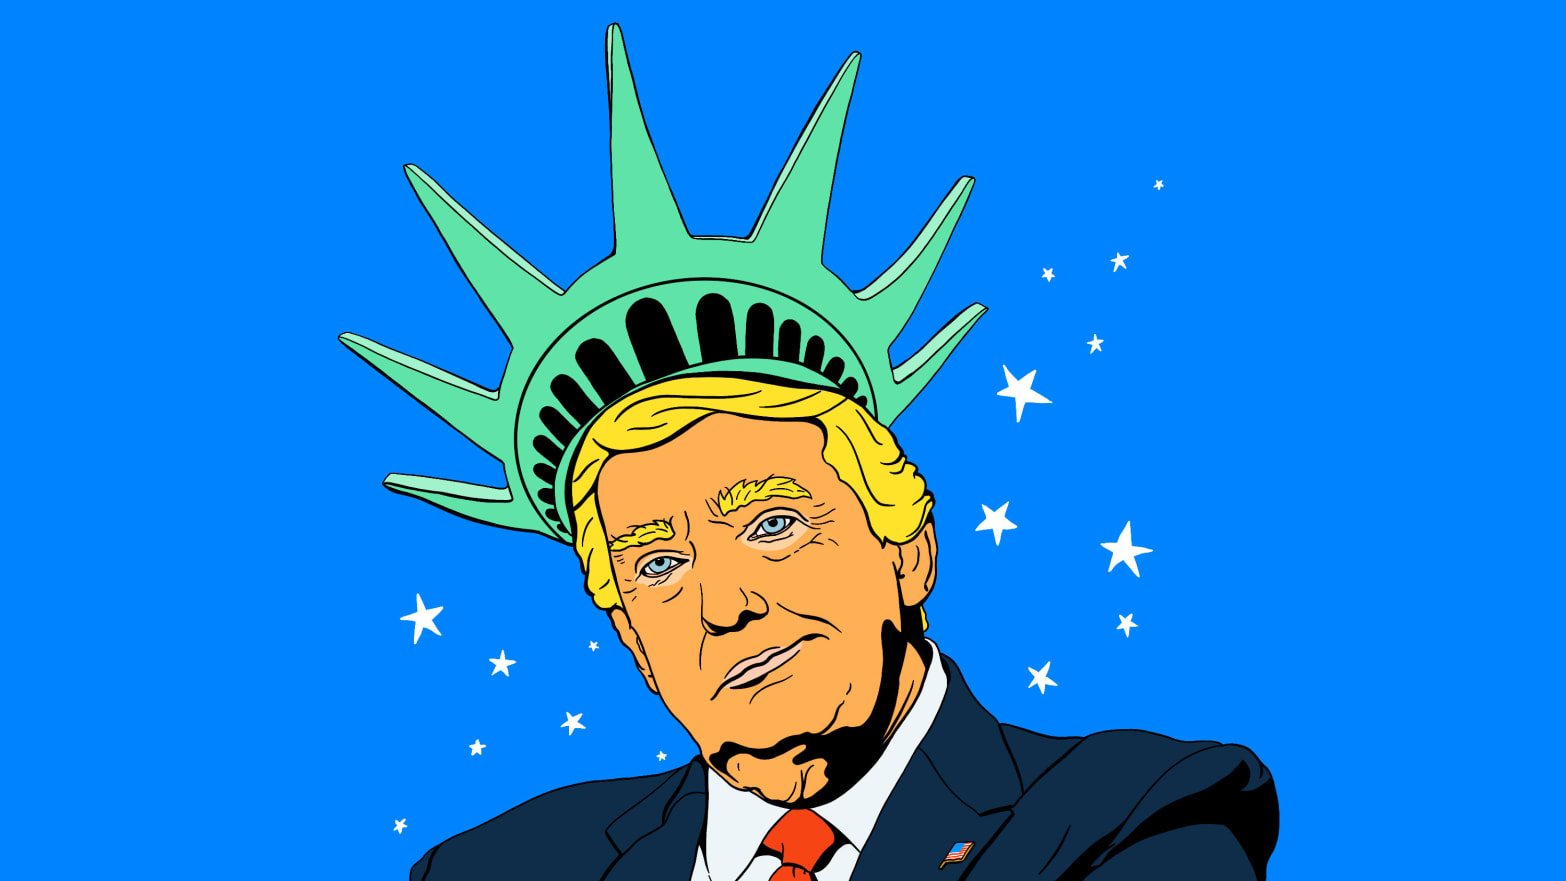 Illustration of Donald Trump wearing a Statue of Liberty crown